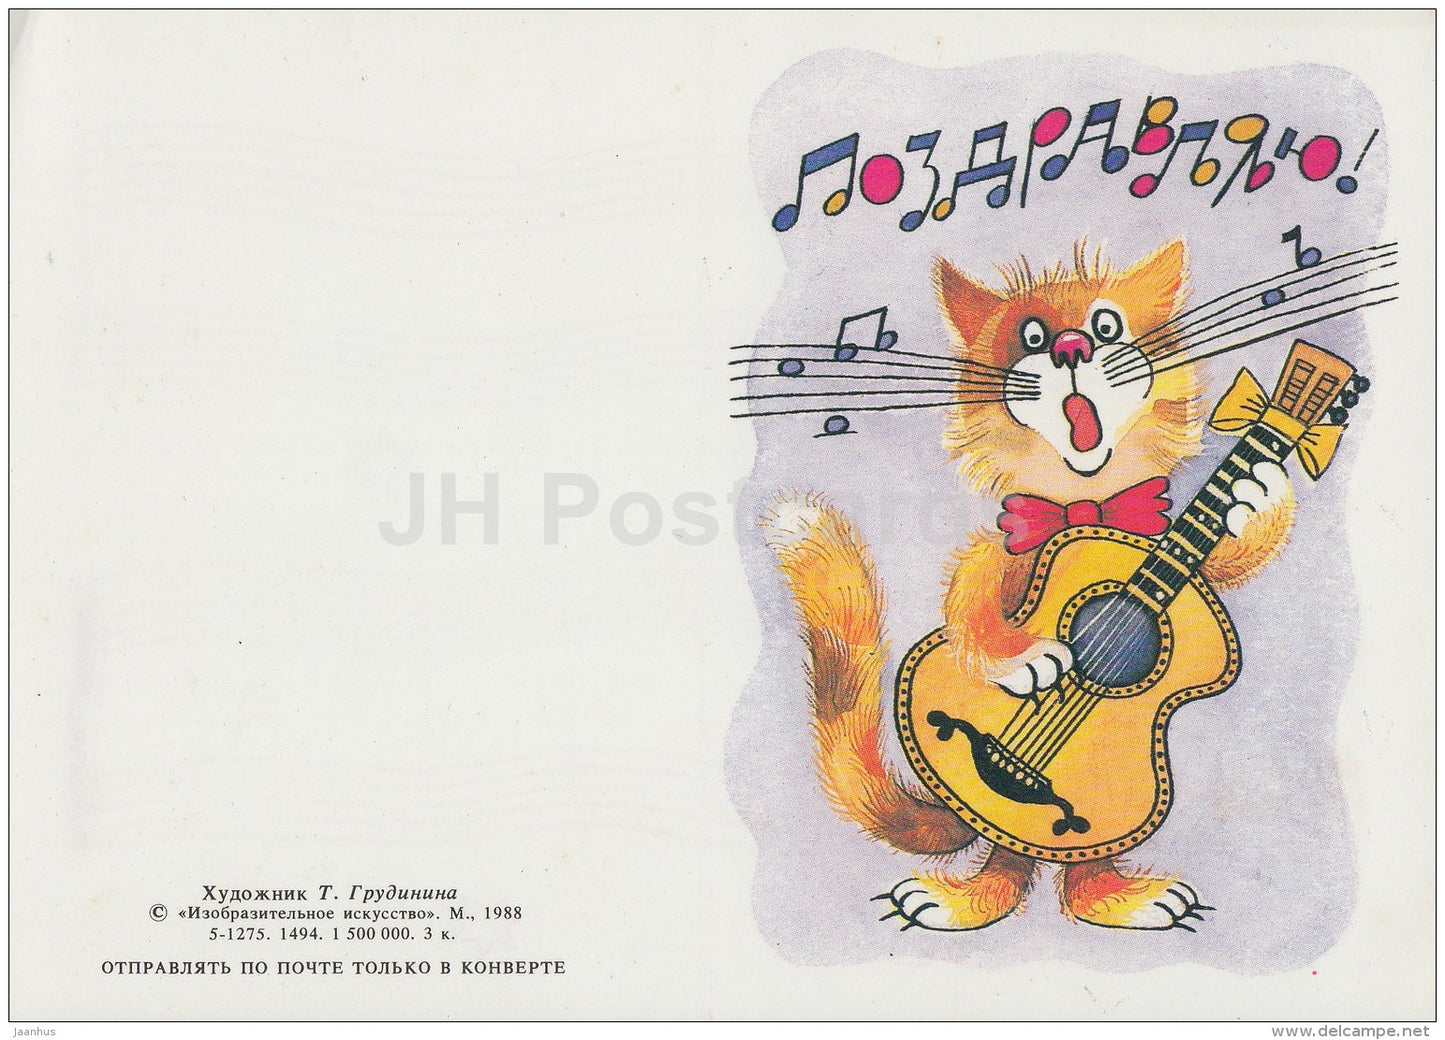 Mini Greeting Card by T. Grudinina - singing cat - guitar - 1988 - Russia USSR - unused - JH Postcards